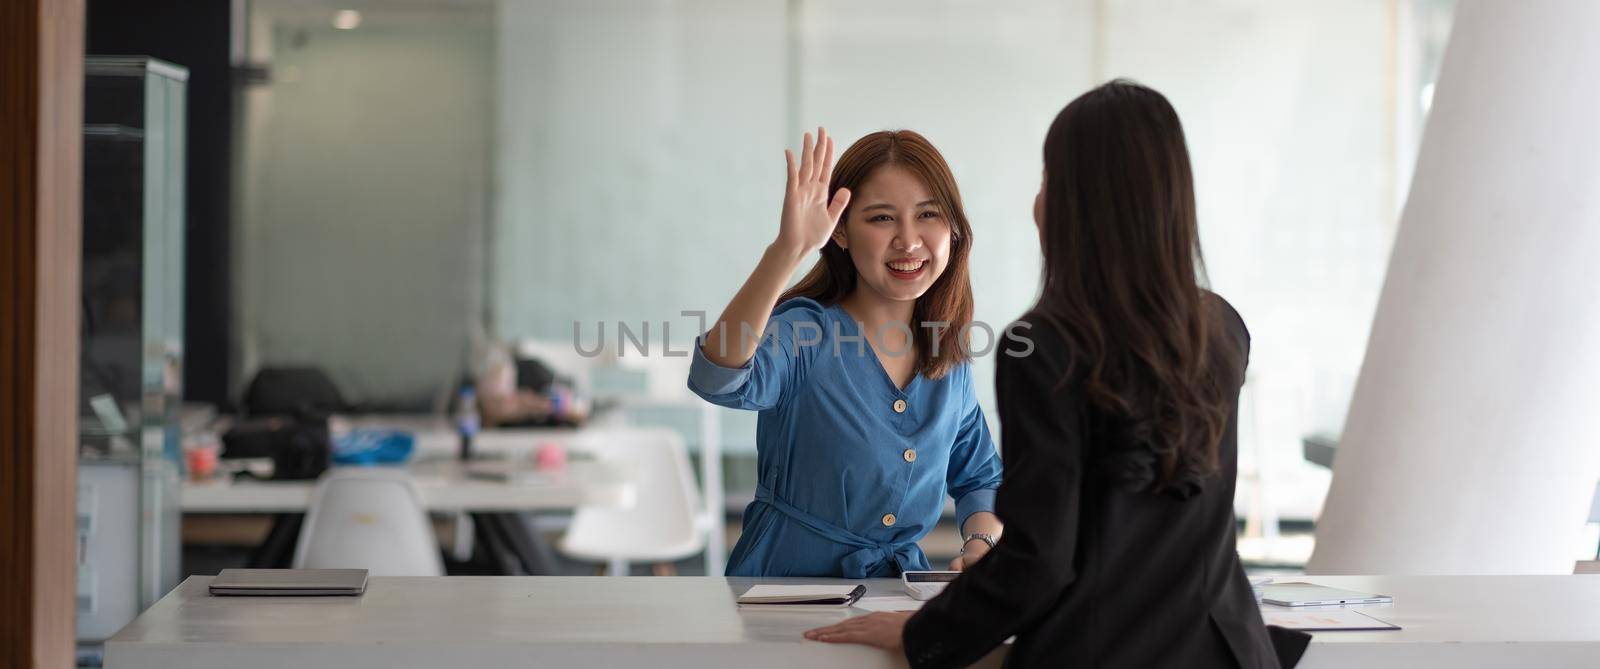 businesswomen giving hi five touching hands and thumb up during meeting for celebration business achievement and success with teamwork by nateemee